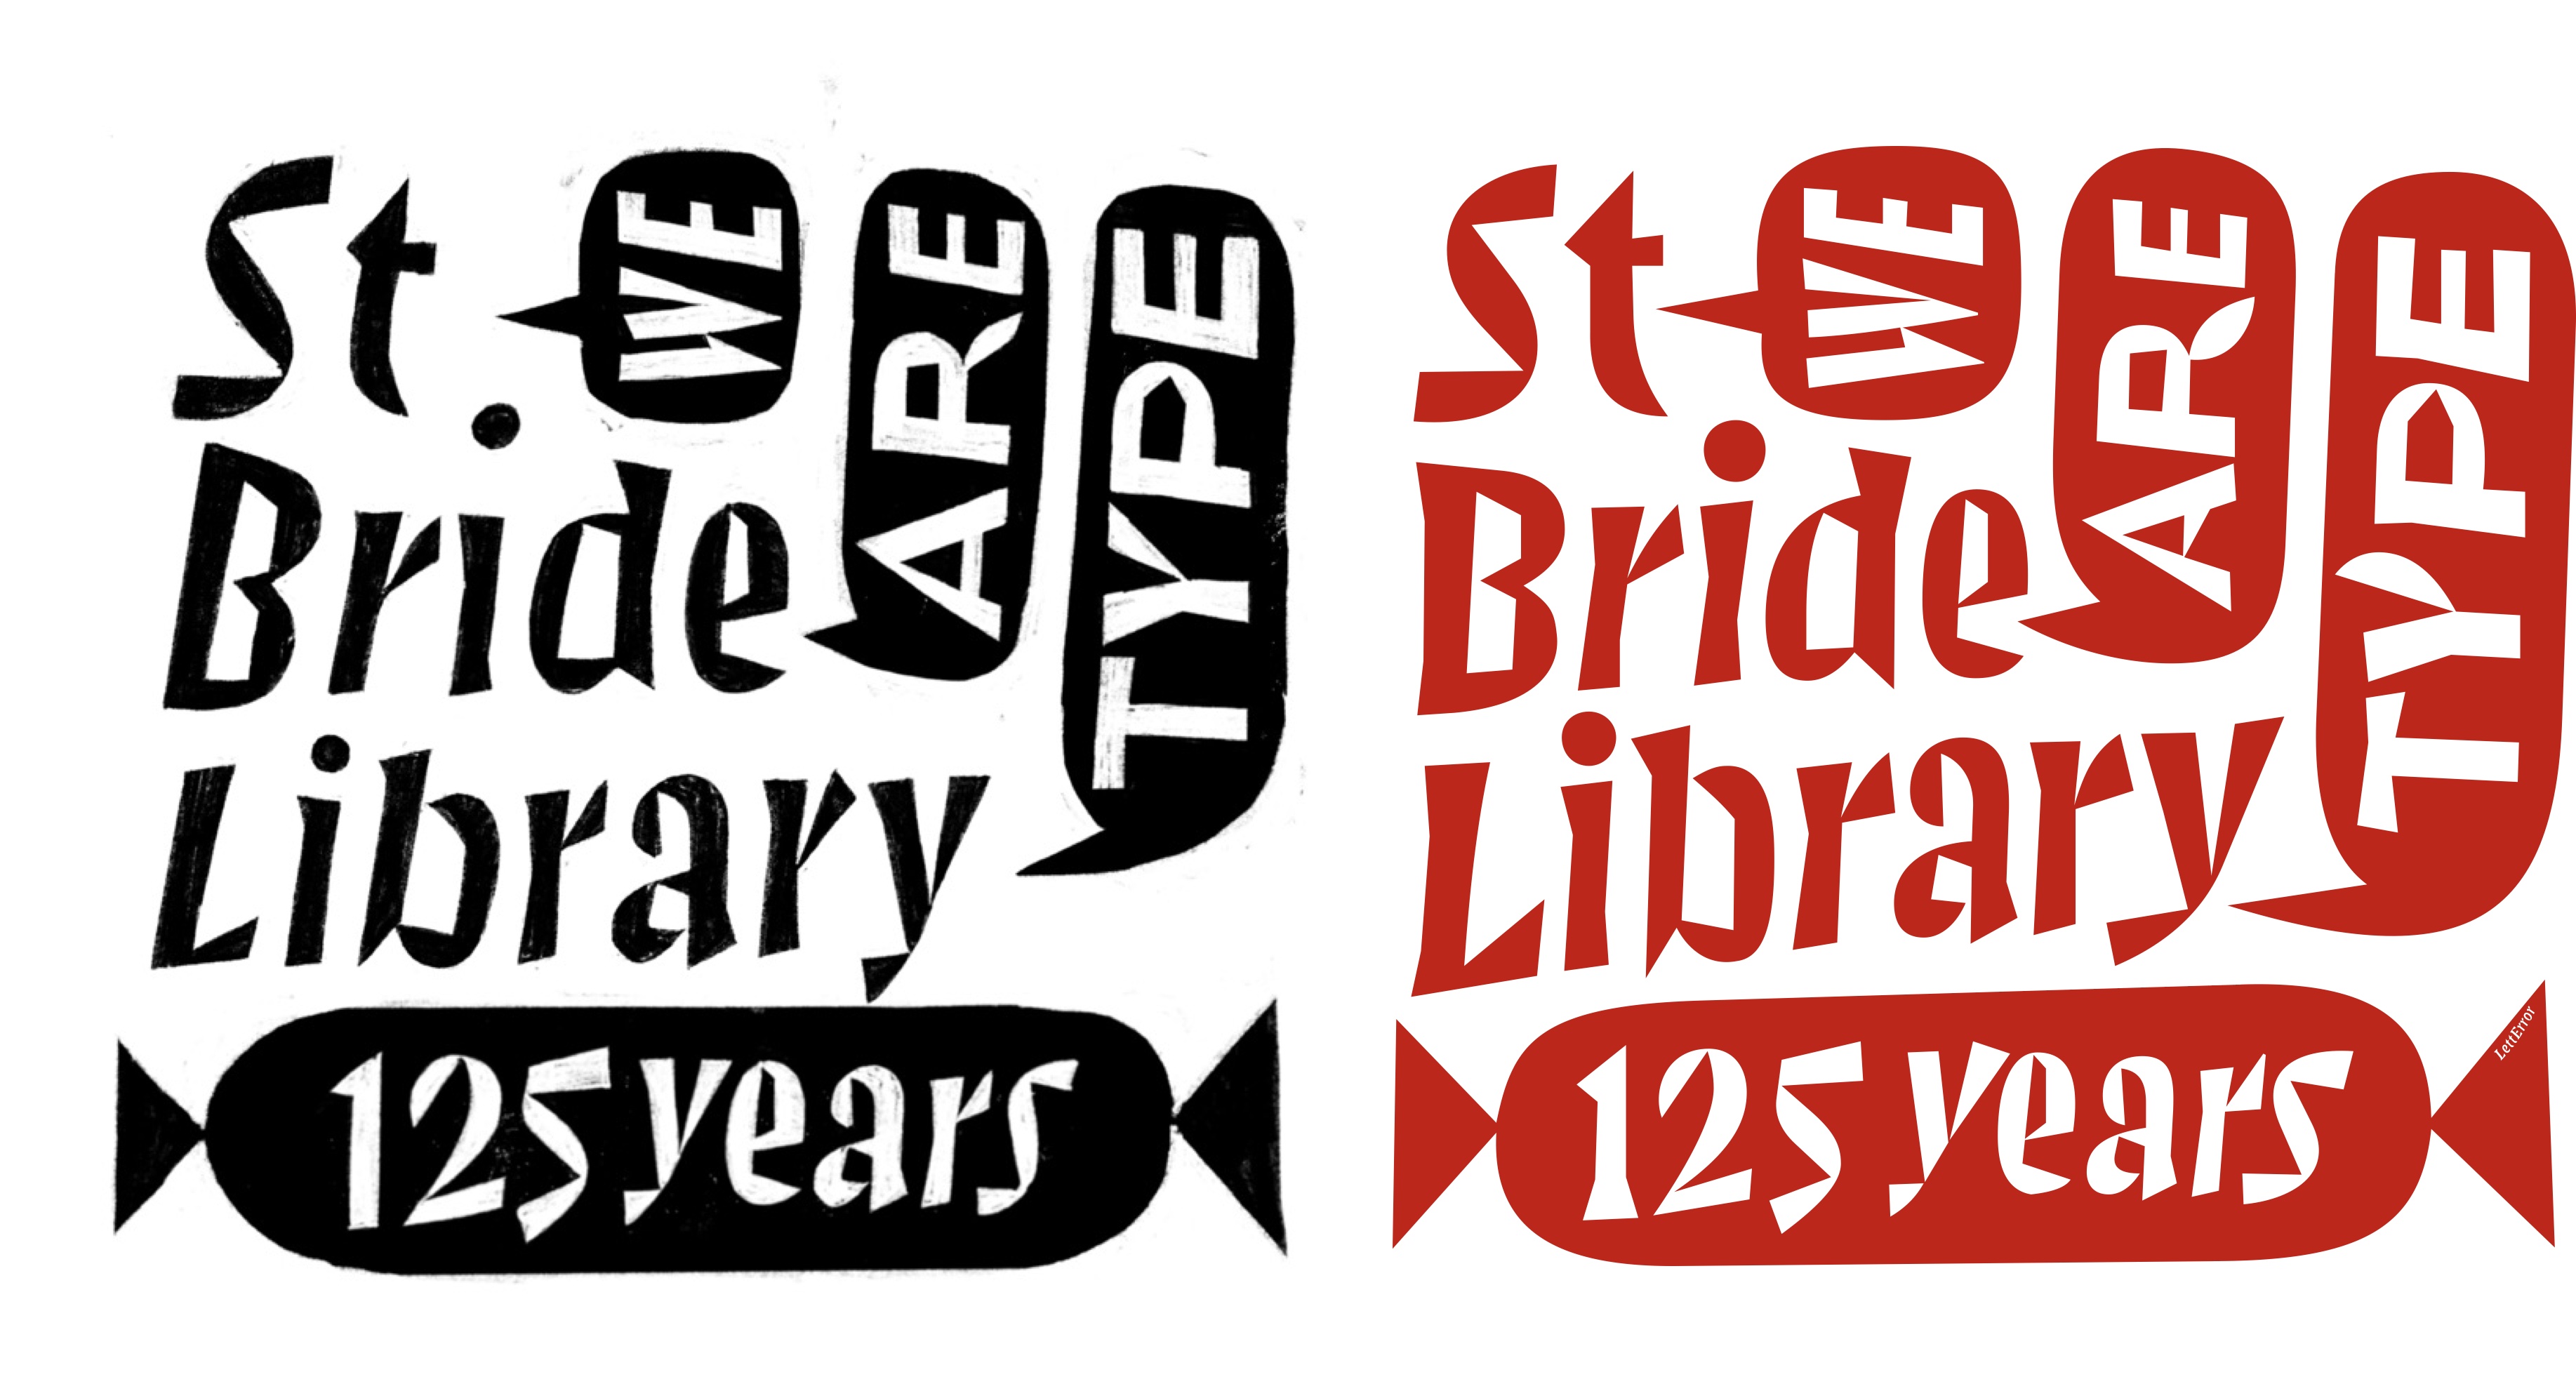 Lettering for tote bag for the St Bride Foundation